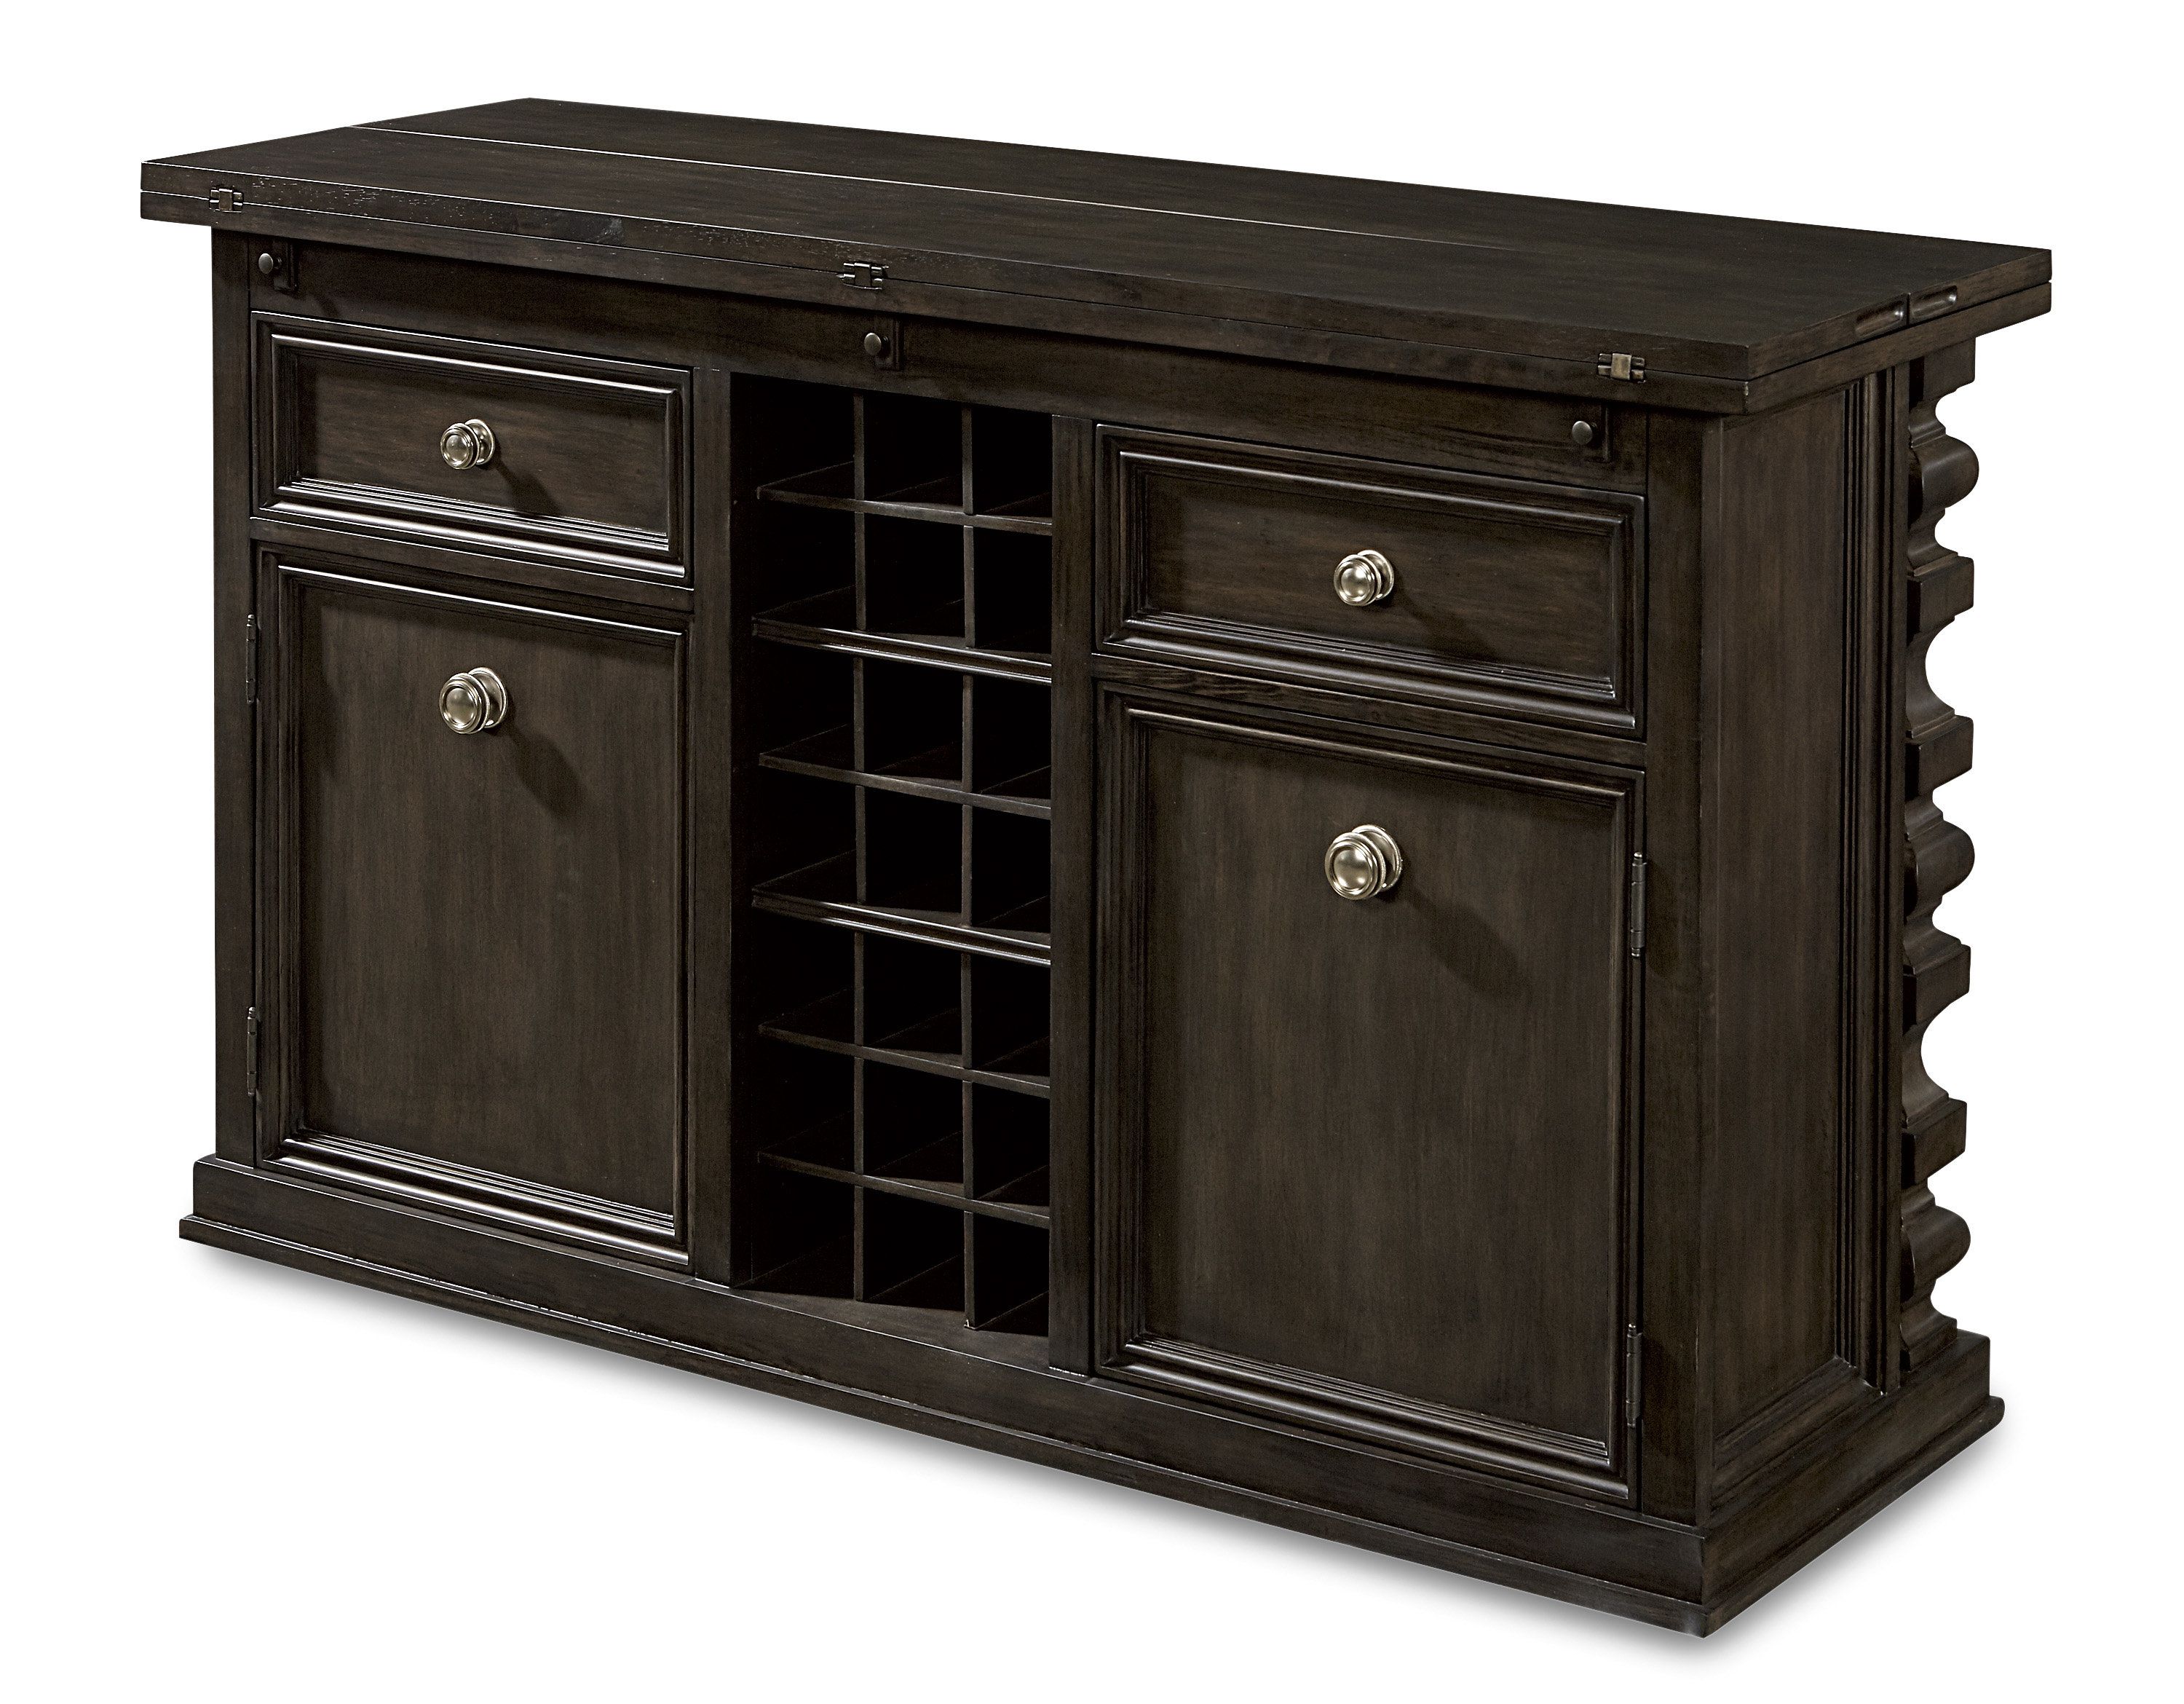 Gray Wood Sideboards & Buffets | Joss & Main With Cazenovia Charnley Sideboards (View 8 of 20)